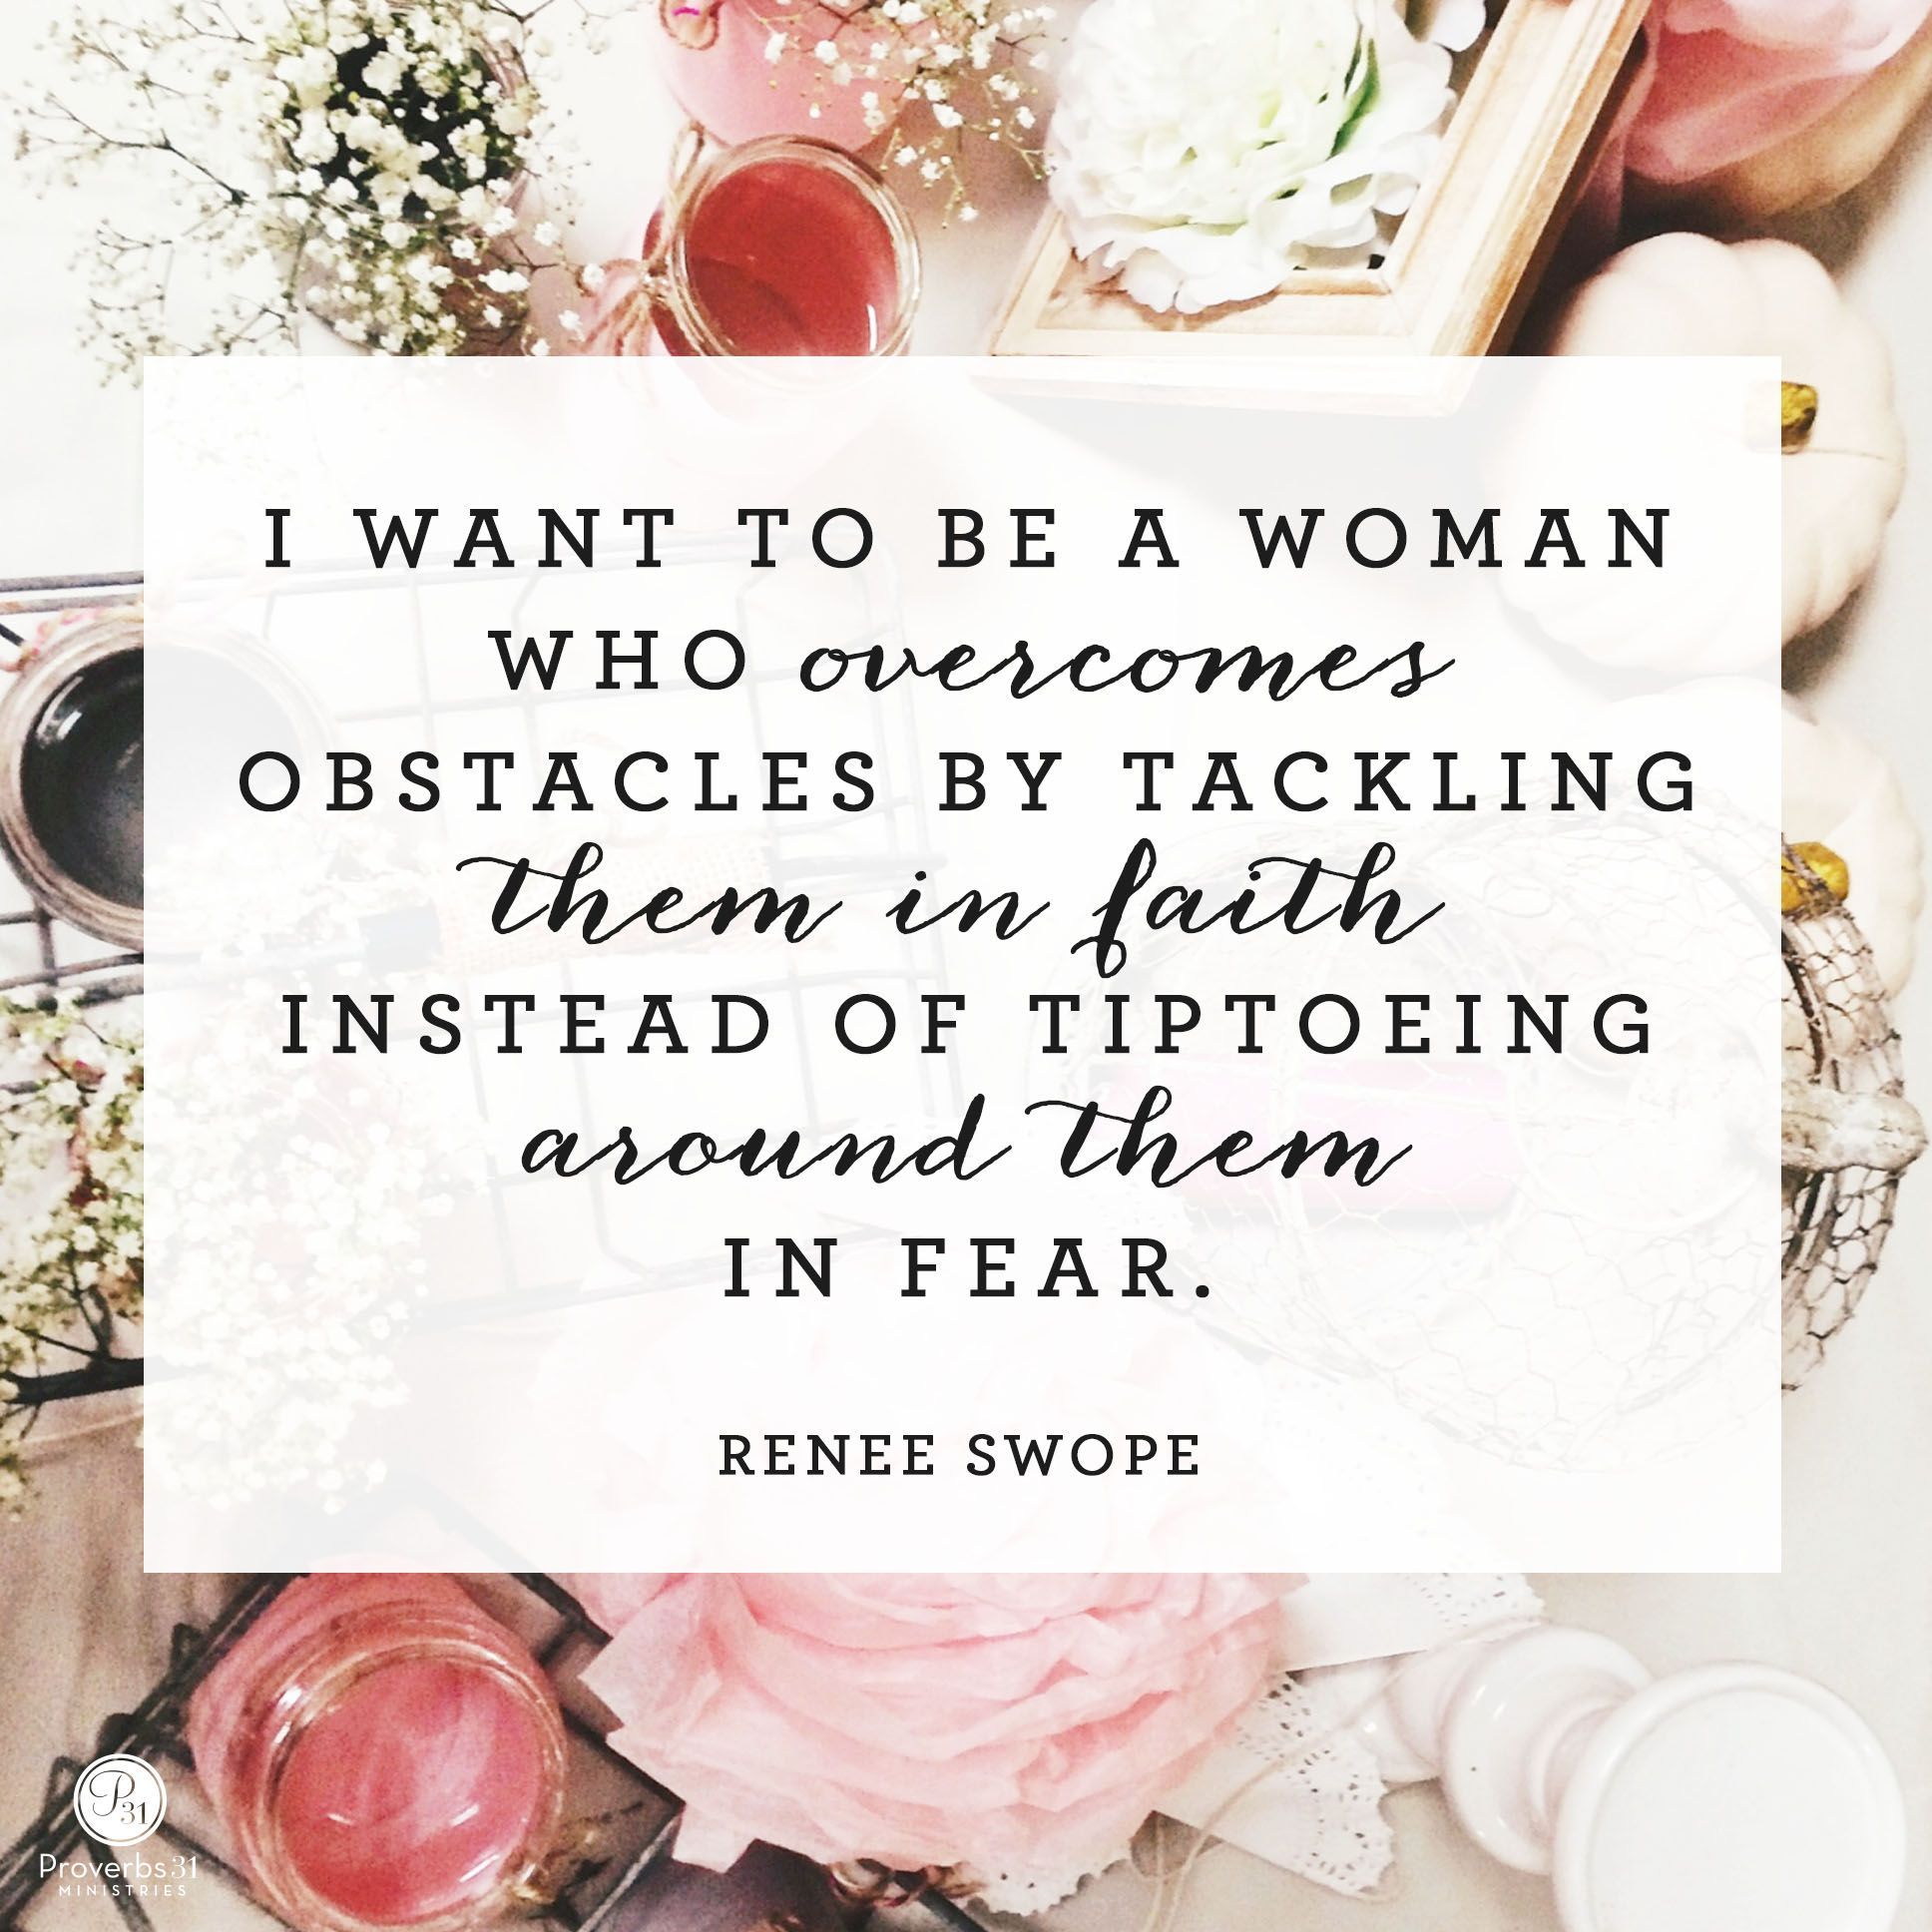 “I want to be a woman who overcomes obstacles by tackling them in faith instead of tiptoeing around